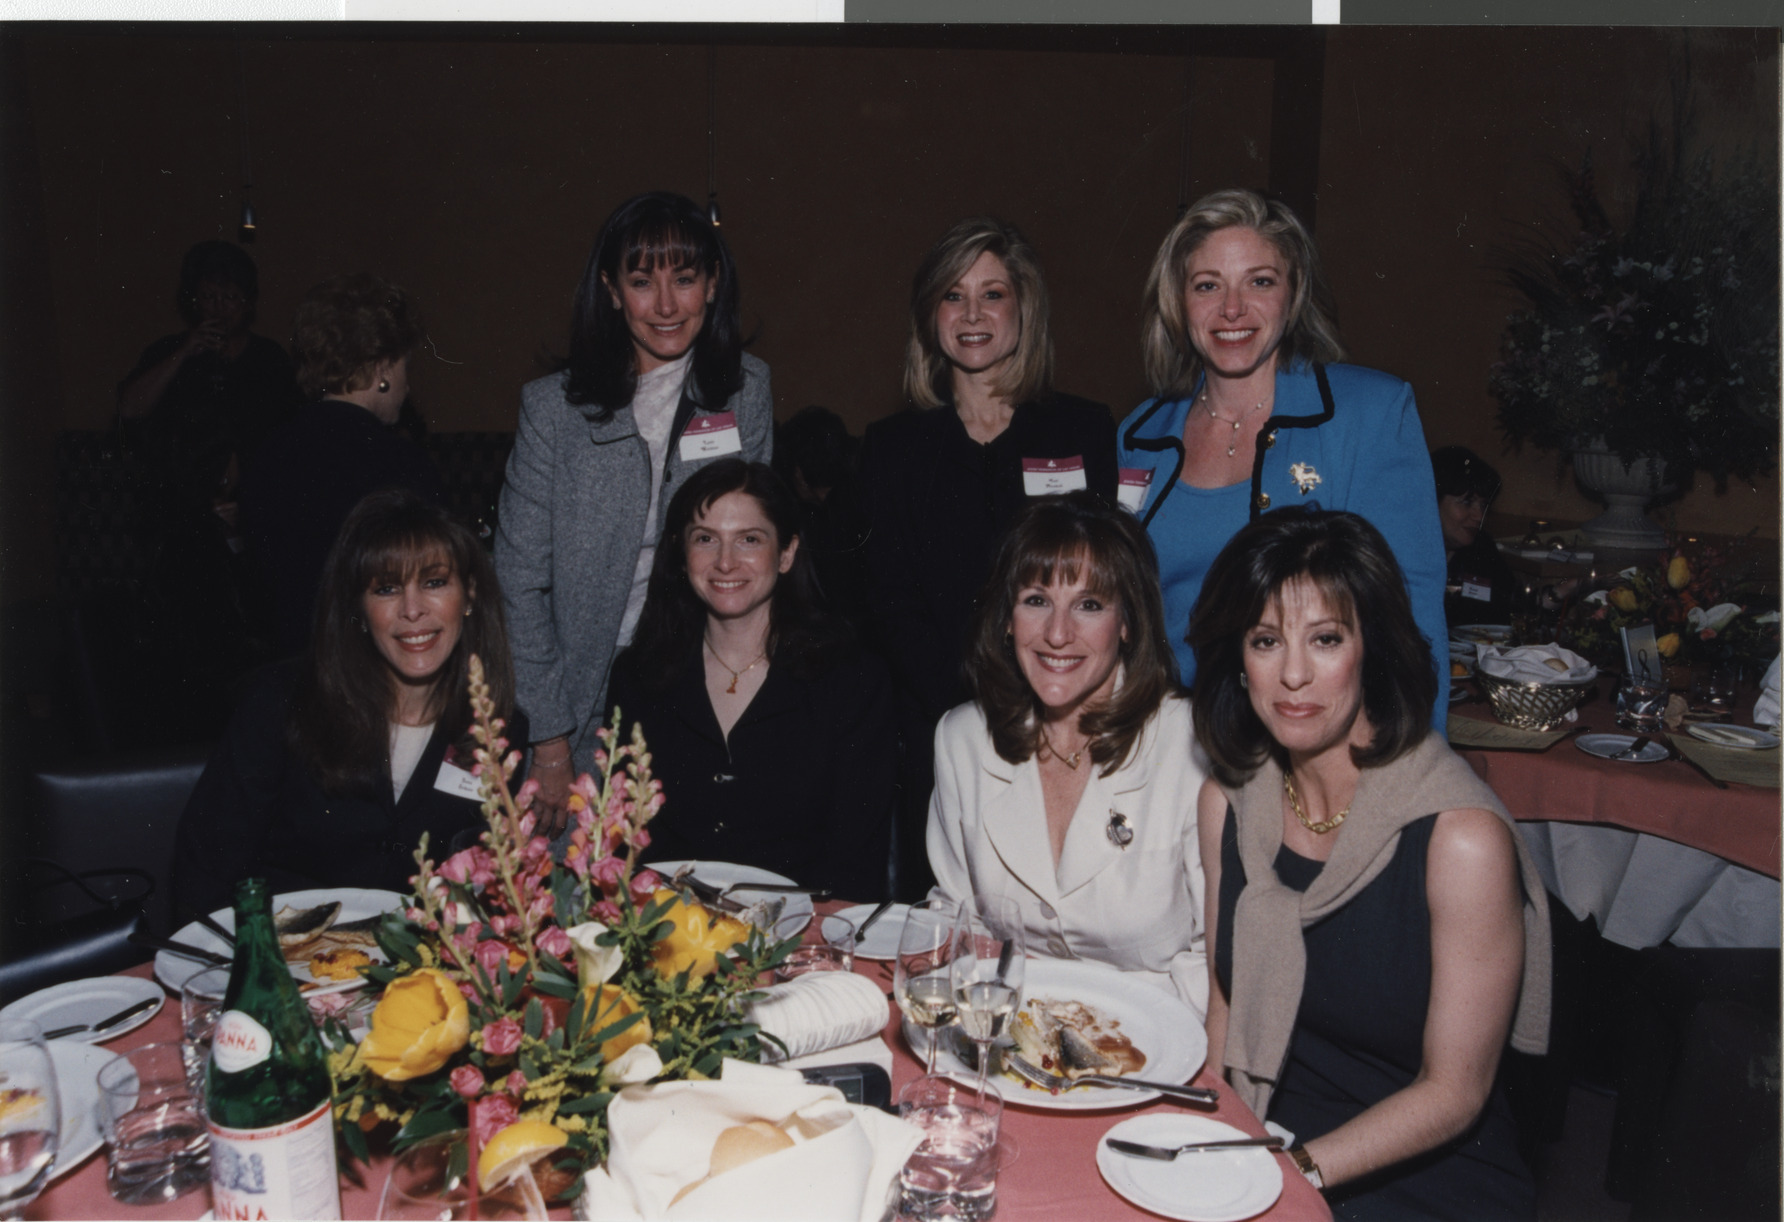 Photograph of event hosted by the Jewish Federation of Las Vegas, 2000s